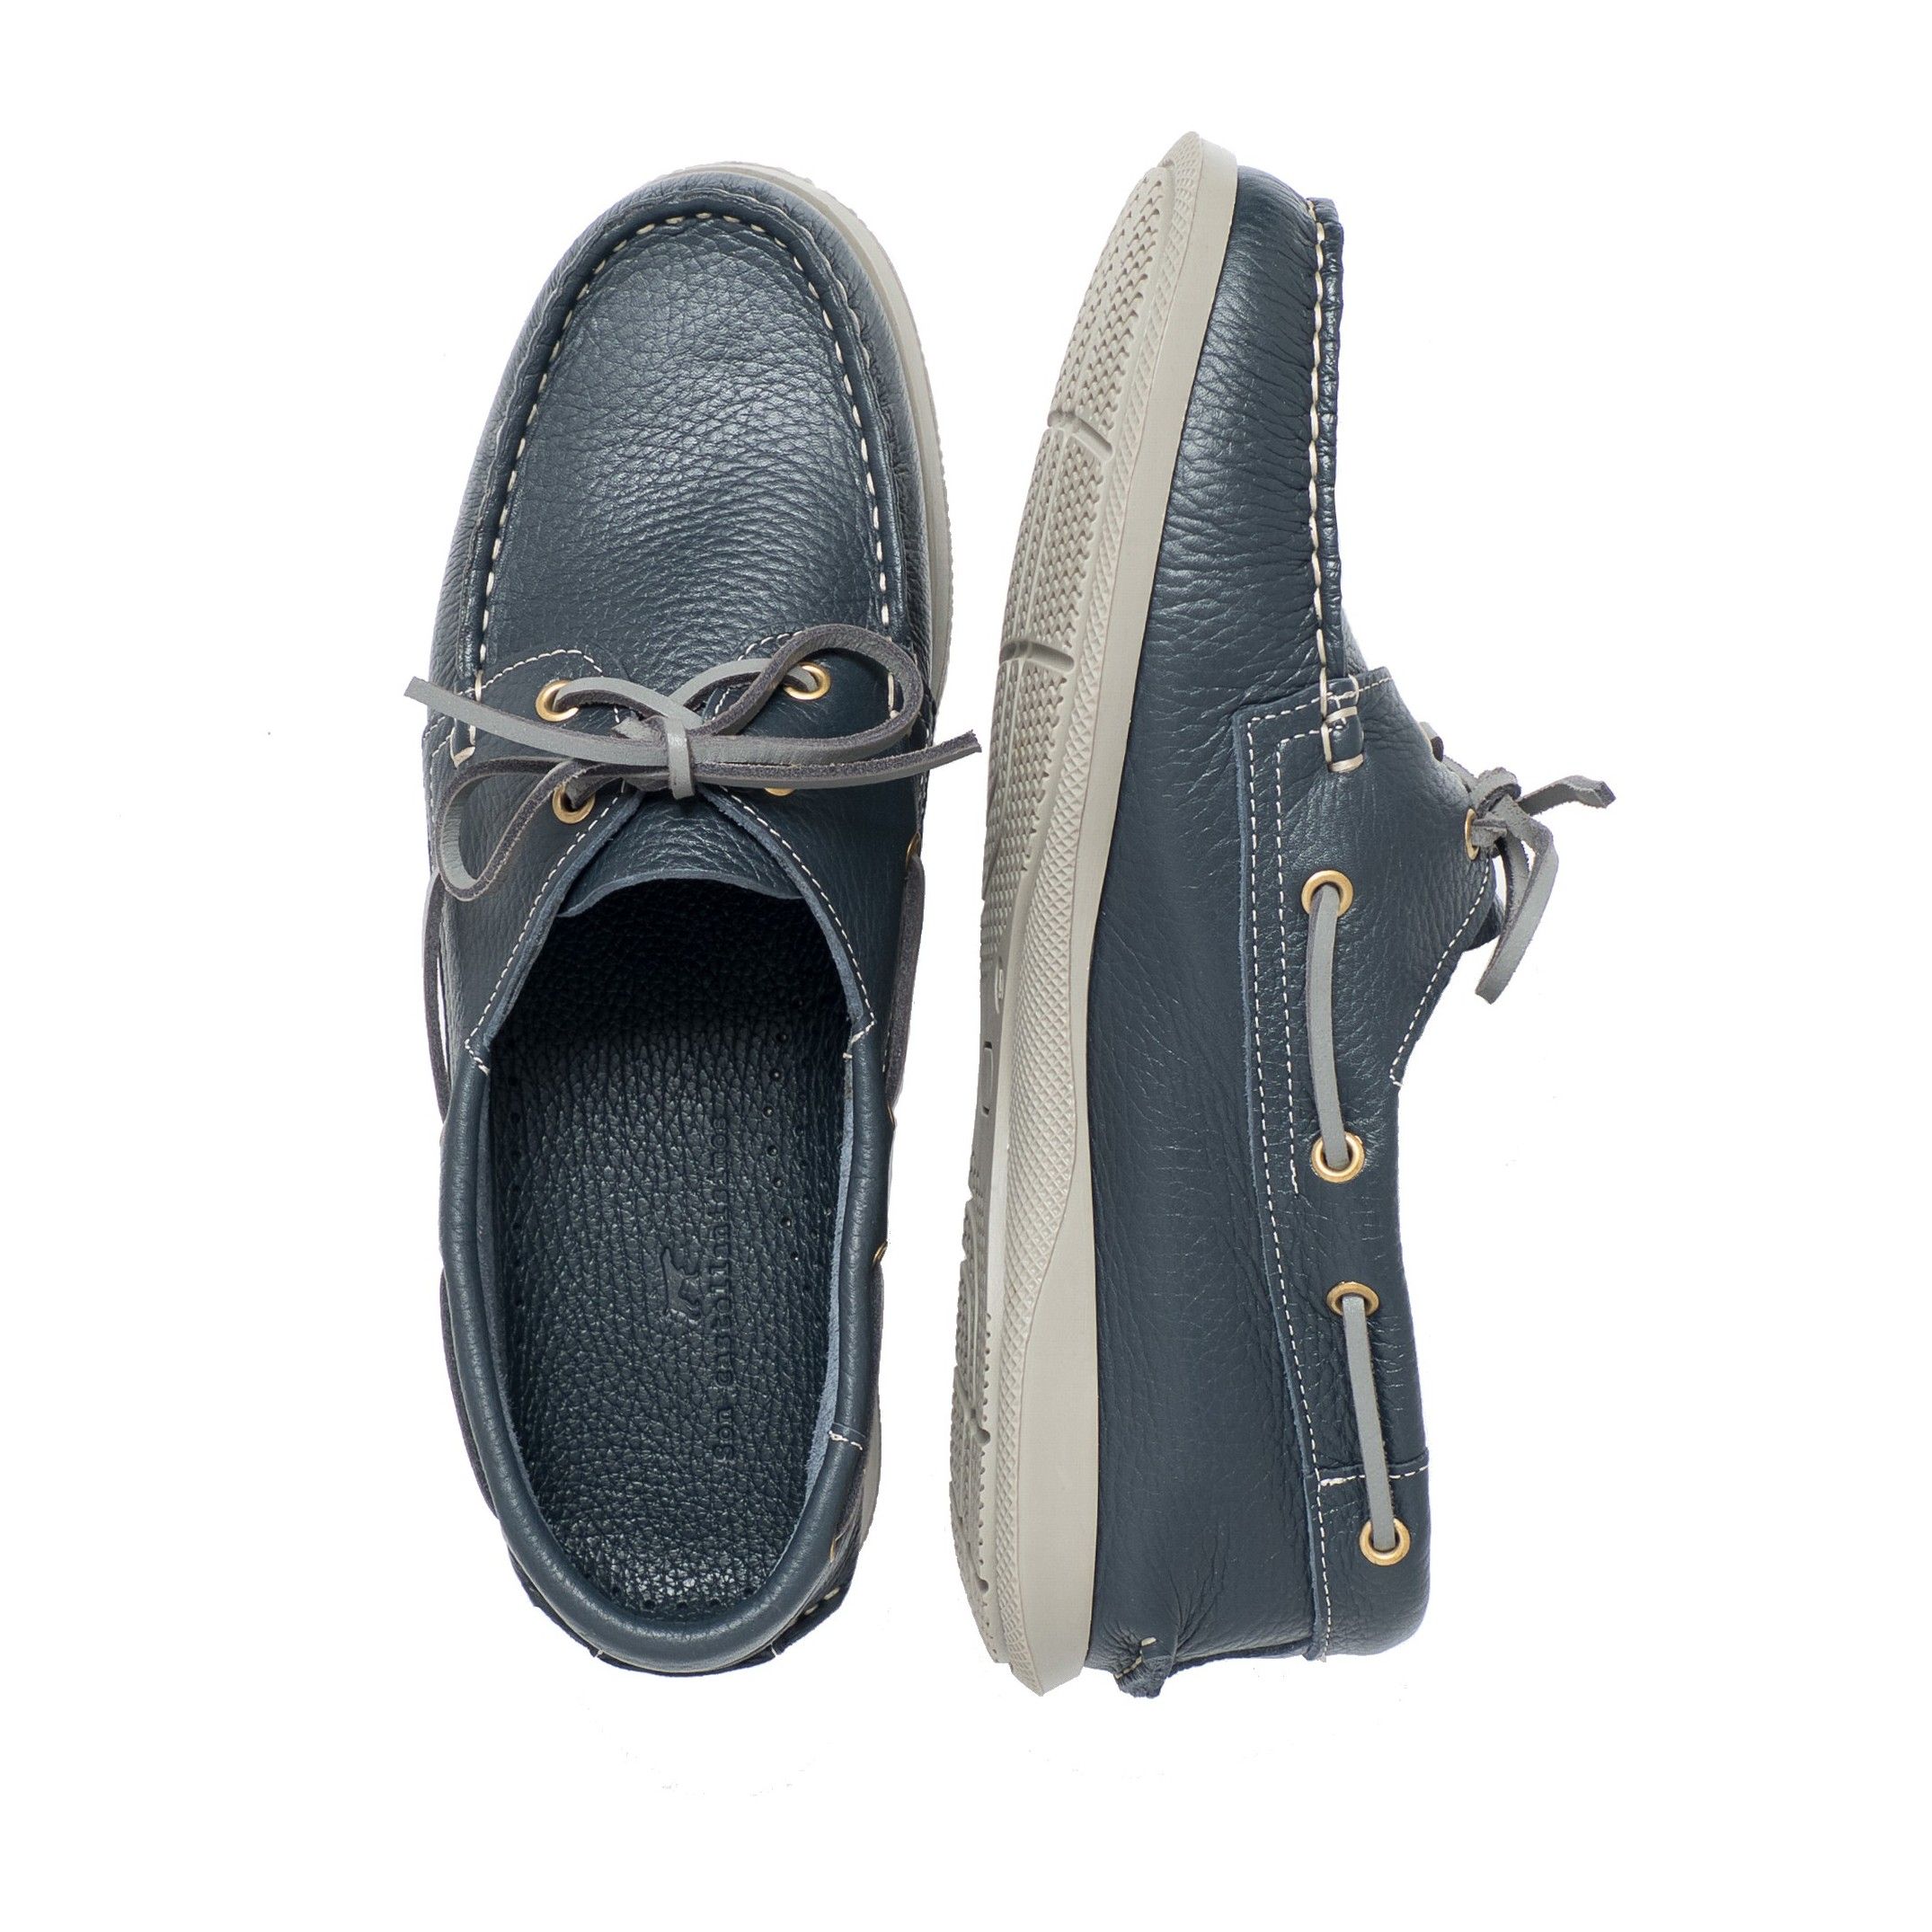 Leather boat shoes, by Son Castellanisimos. Upper made of cowhide leather. Closure of leather laces. Inner lining and insole: cowhide leather. Sole material: 100% synthetic and non-slip. Heel height: 2 cm. Designed and manufactured in Spain.